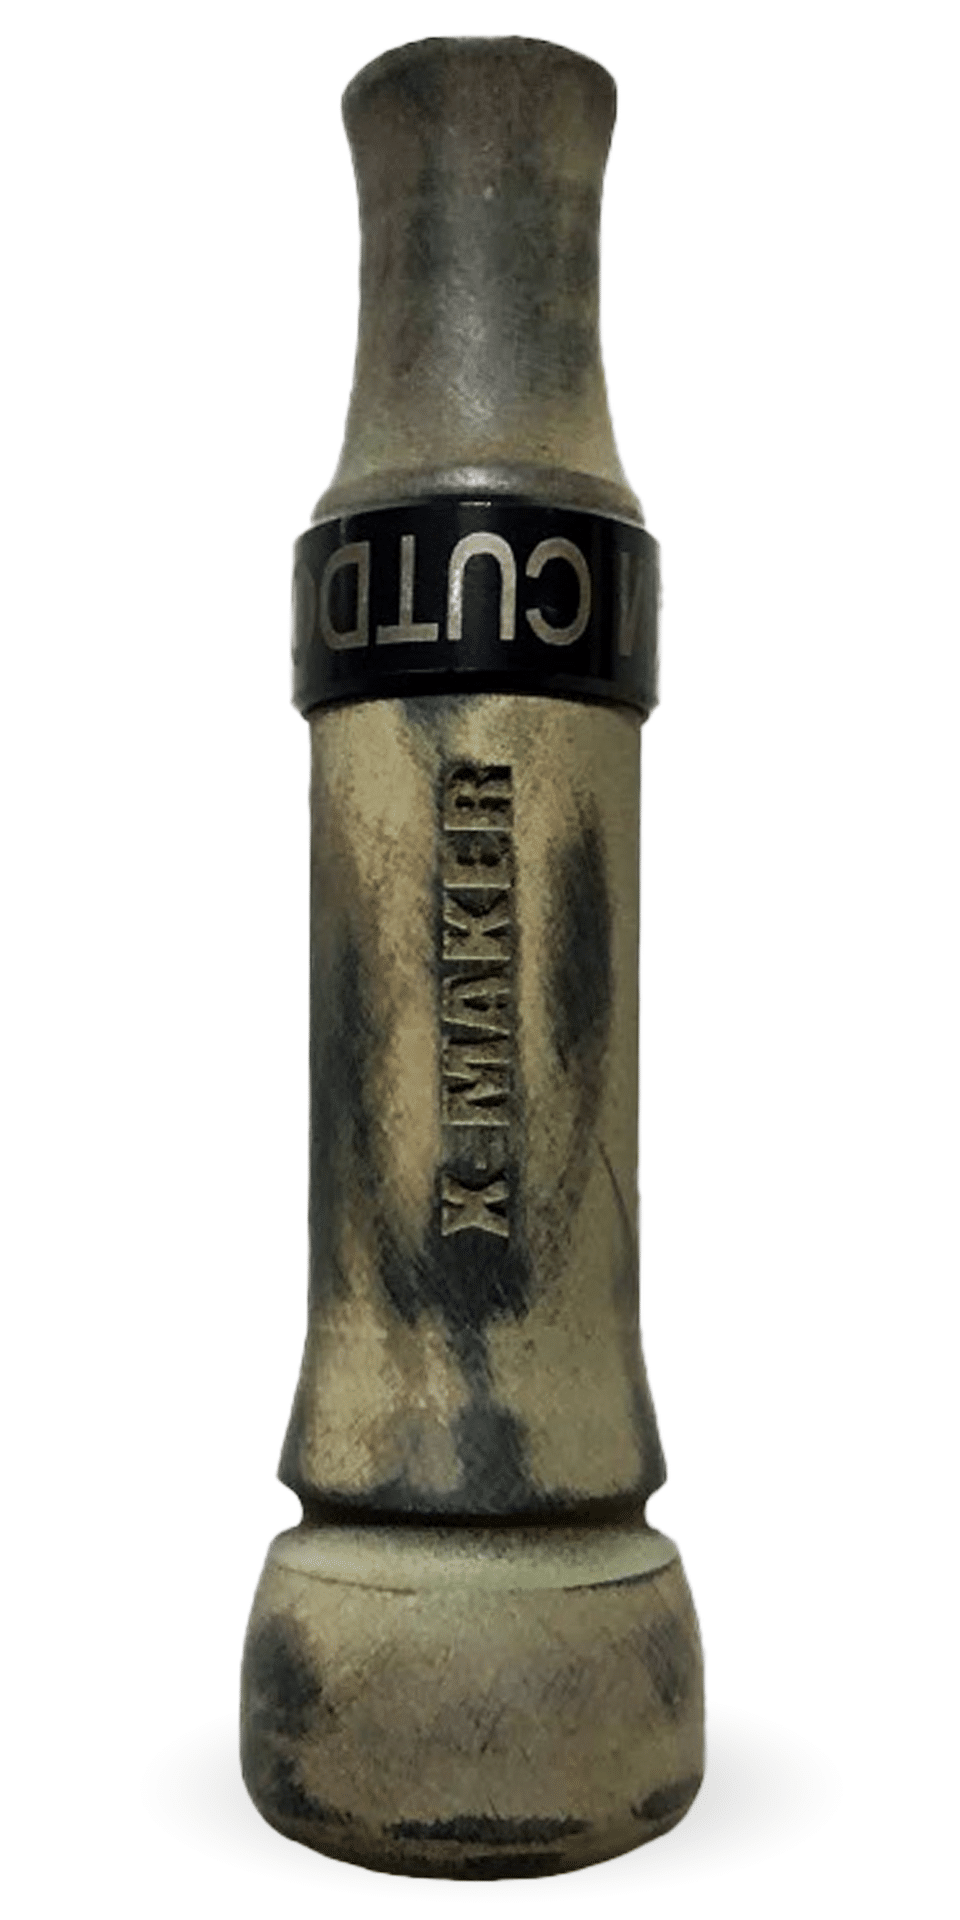 X-MAKER Cut-Down Duck Call Rough finish with Etched Black Band Mallard cutdown duck call by Kirk McCullough